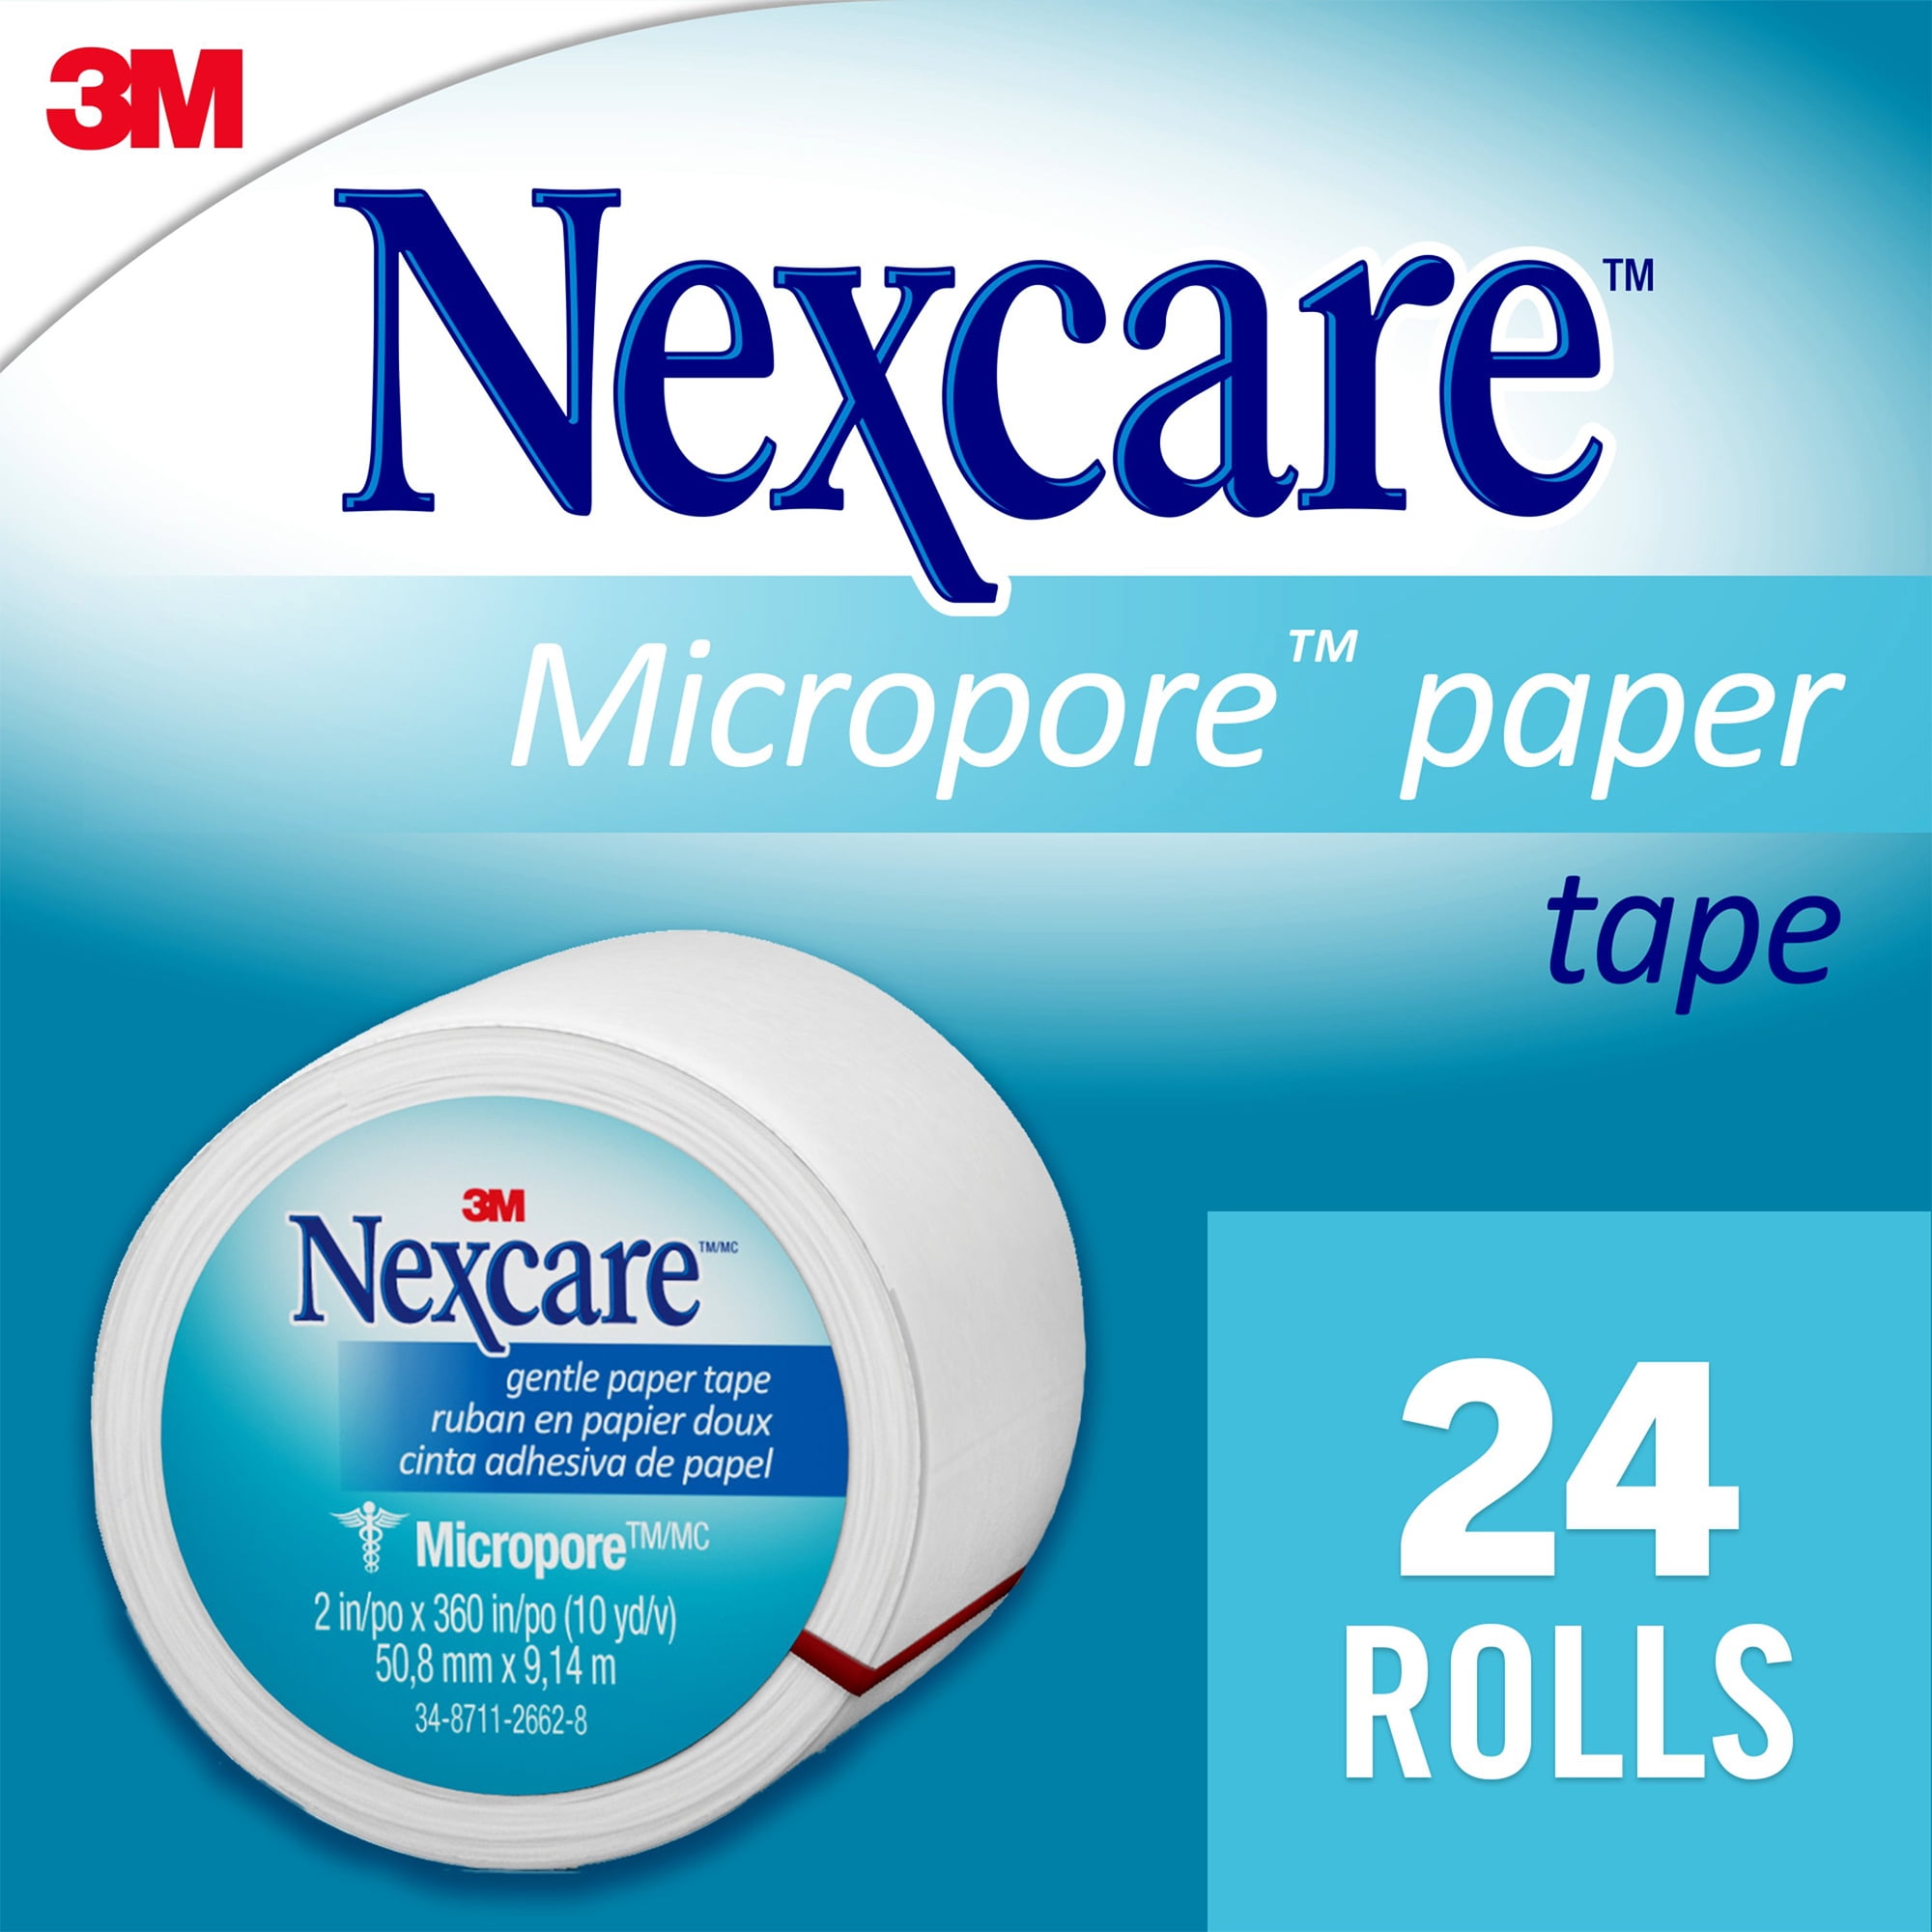 3M Nexcare First Aid Tape, Mouth Tape, Strong Hold, 1 in x 4 Yards #SST-1 